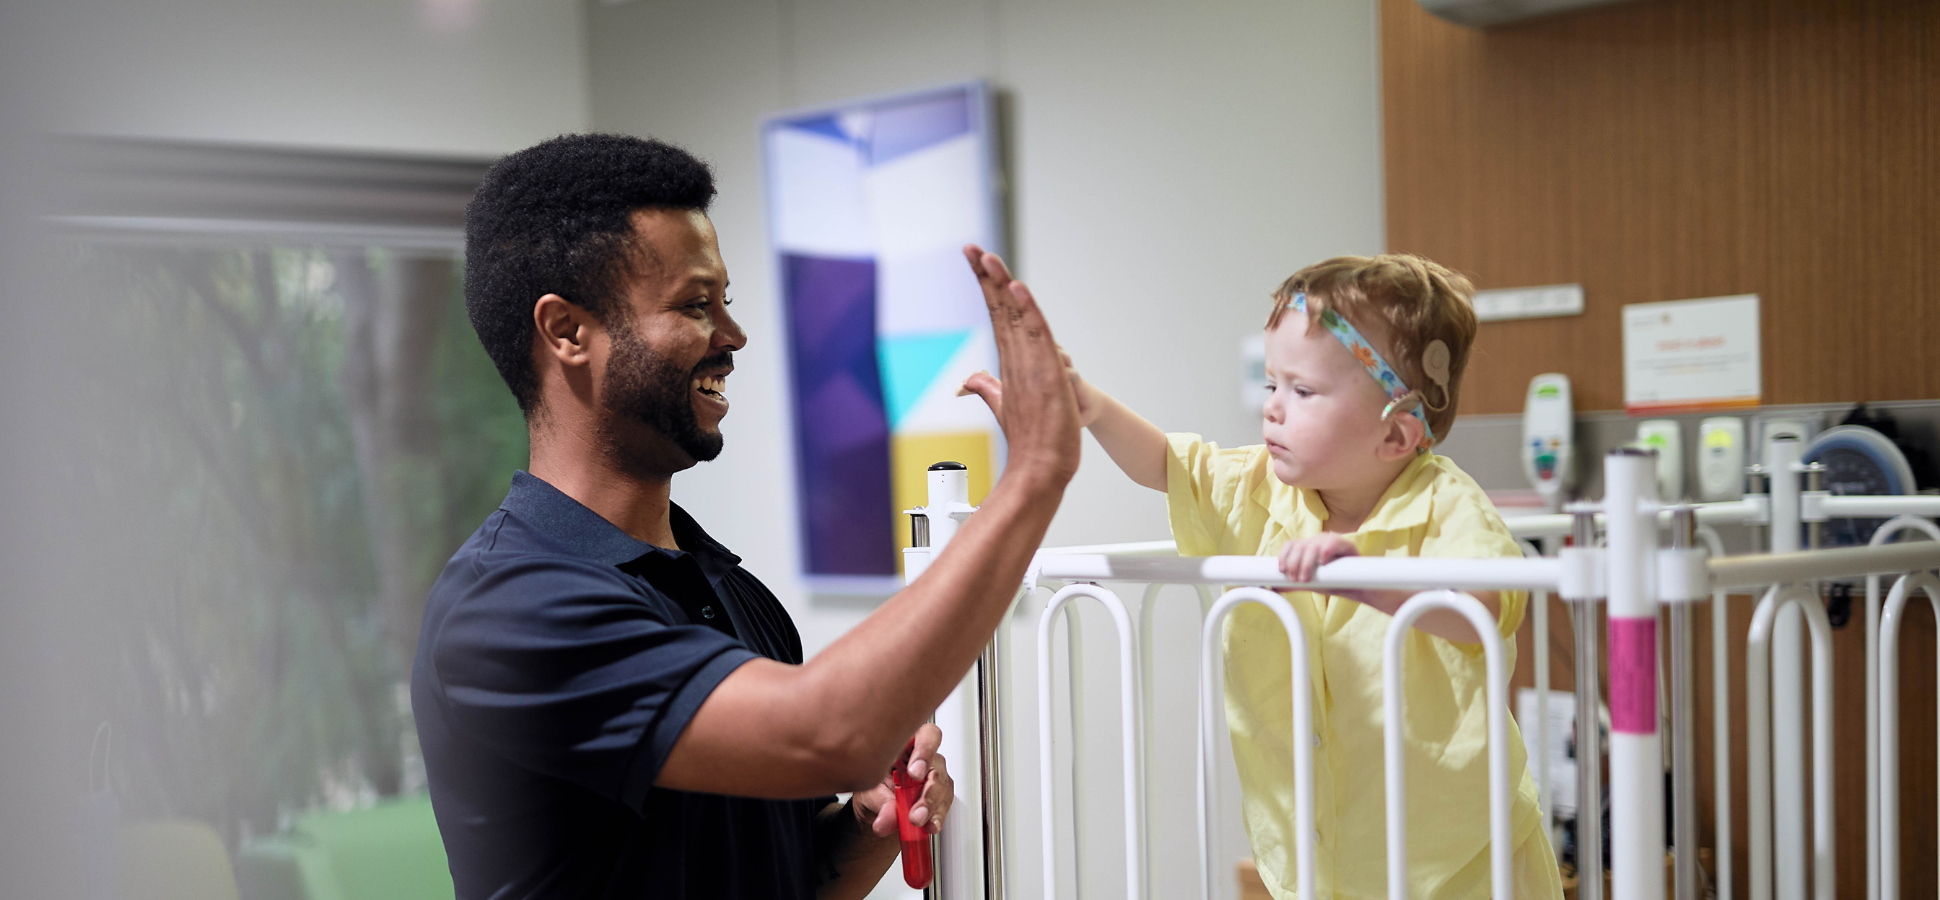 Caregiver smiling and high-fiving with small child, child is in a hospital bed